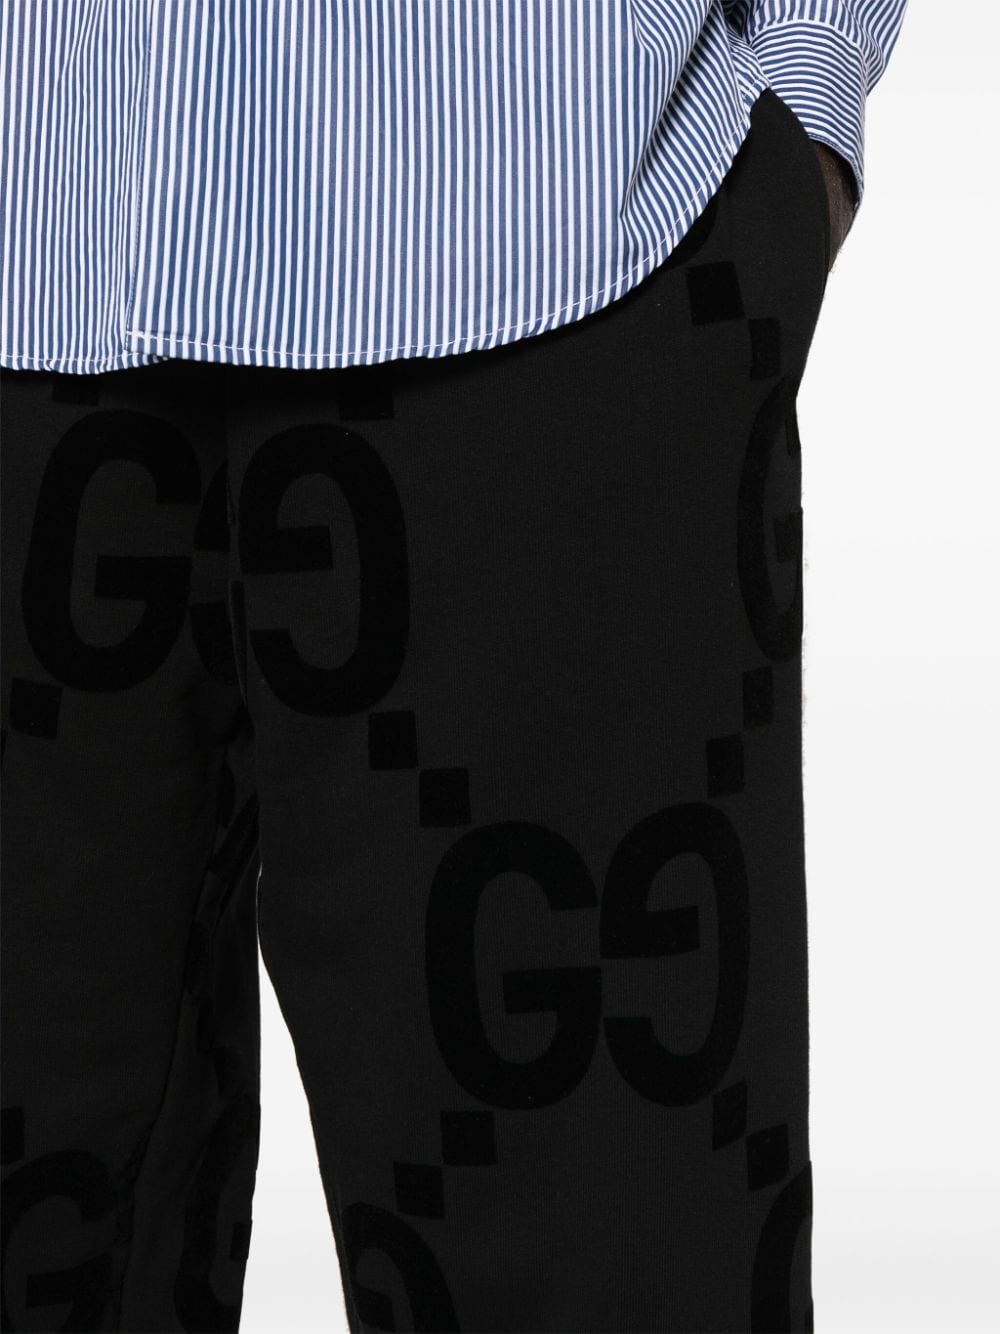 GG-flocked cotton track trousers